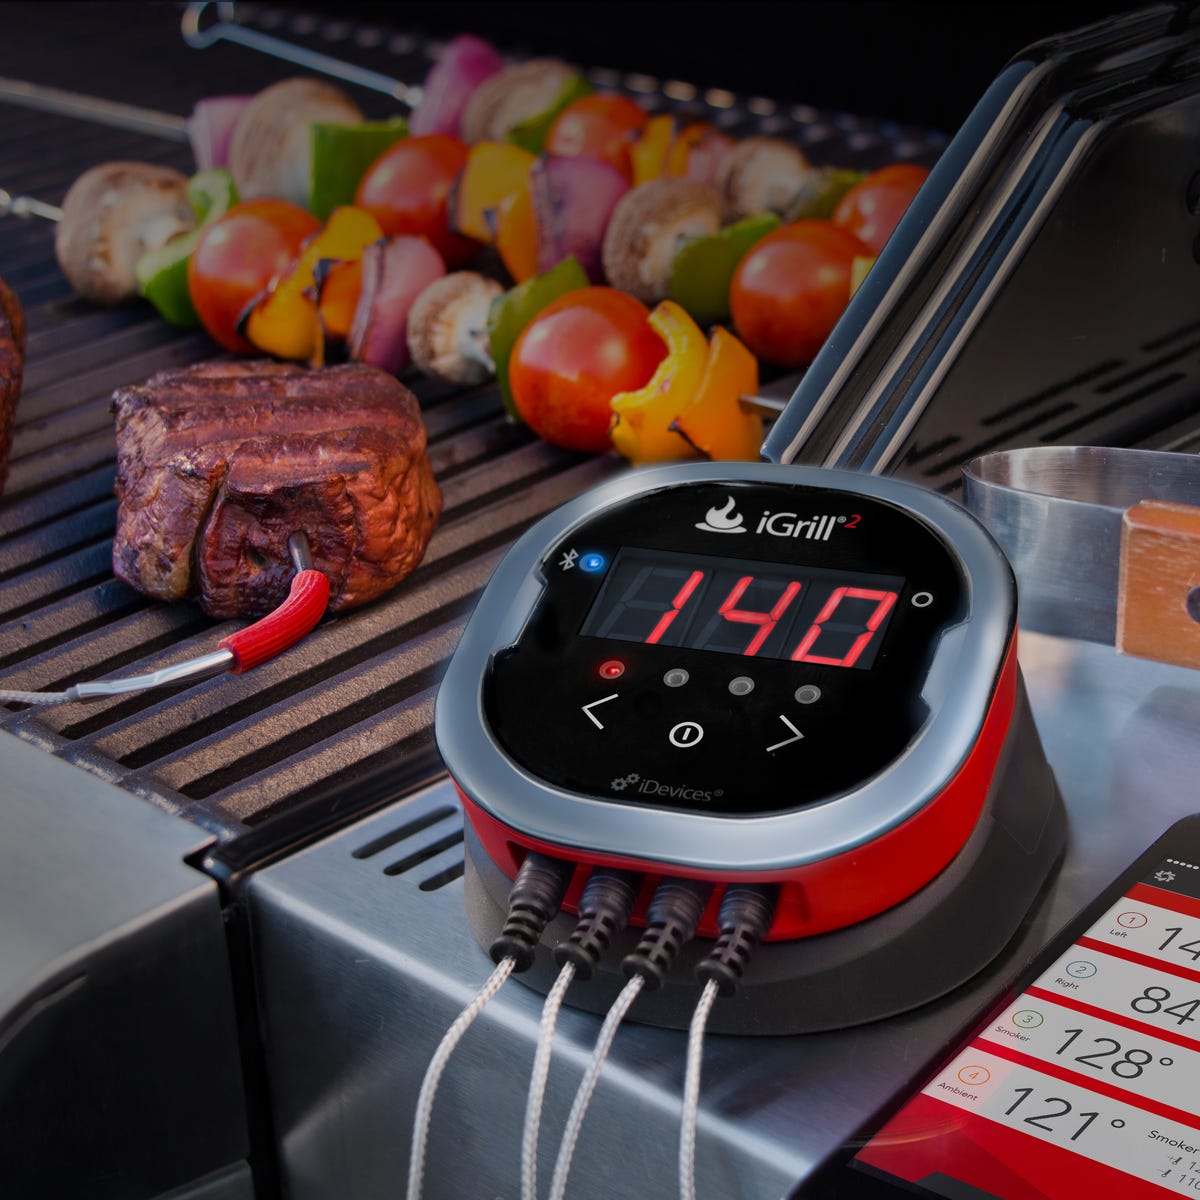 iDevices iGrill2 Bluetooth® Smart Meat Thermometer review: Keep